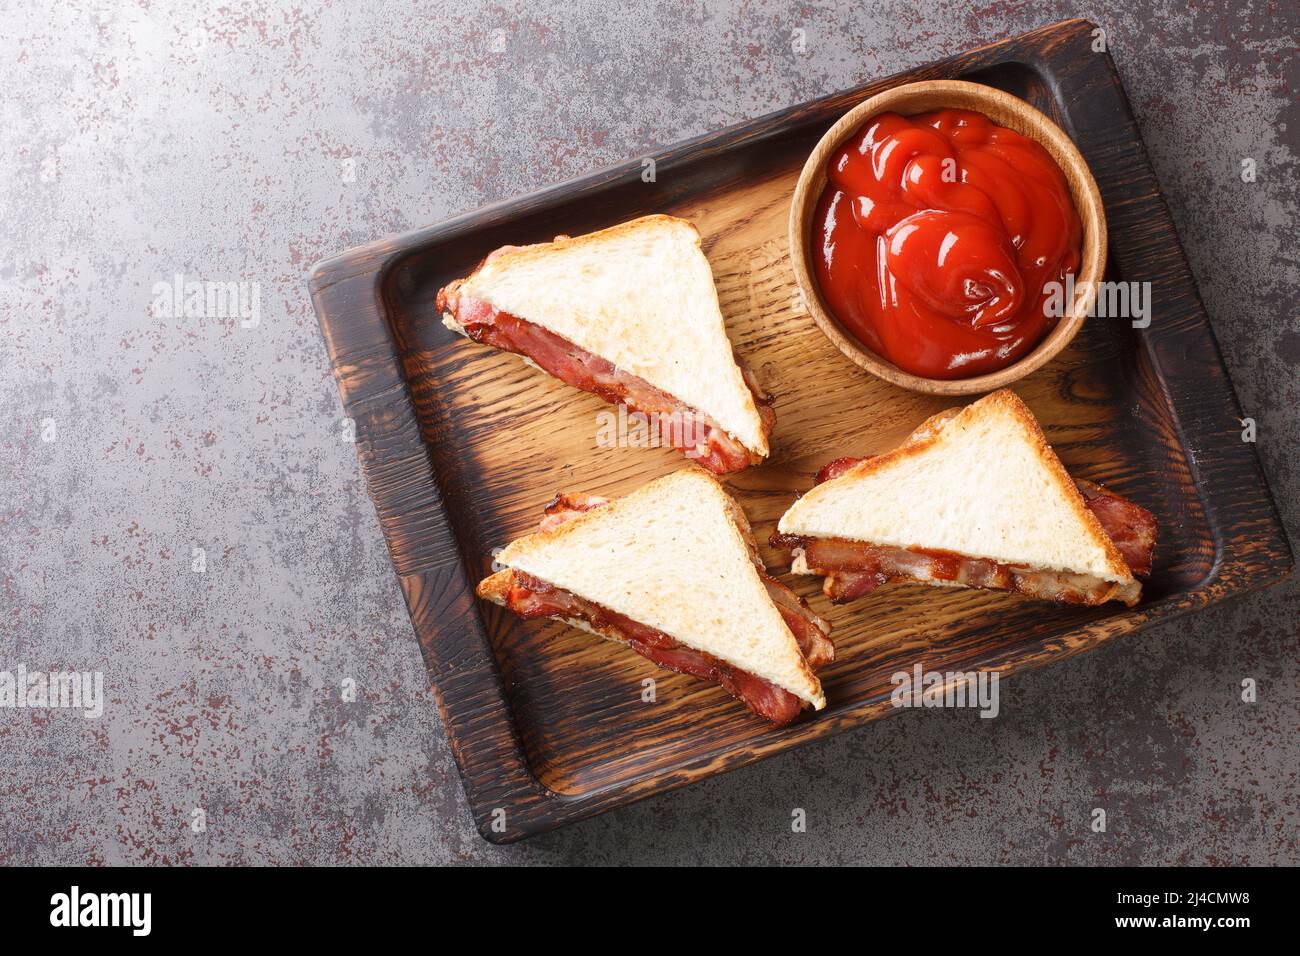 Sandwich with crispy bacon melted butter and ketchup close-up on a wooden tray on the table. horizontal top view from above Stock Photo